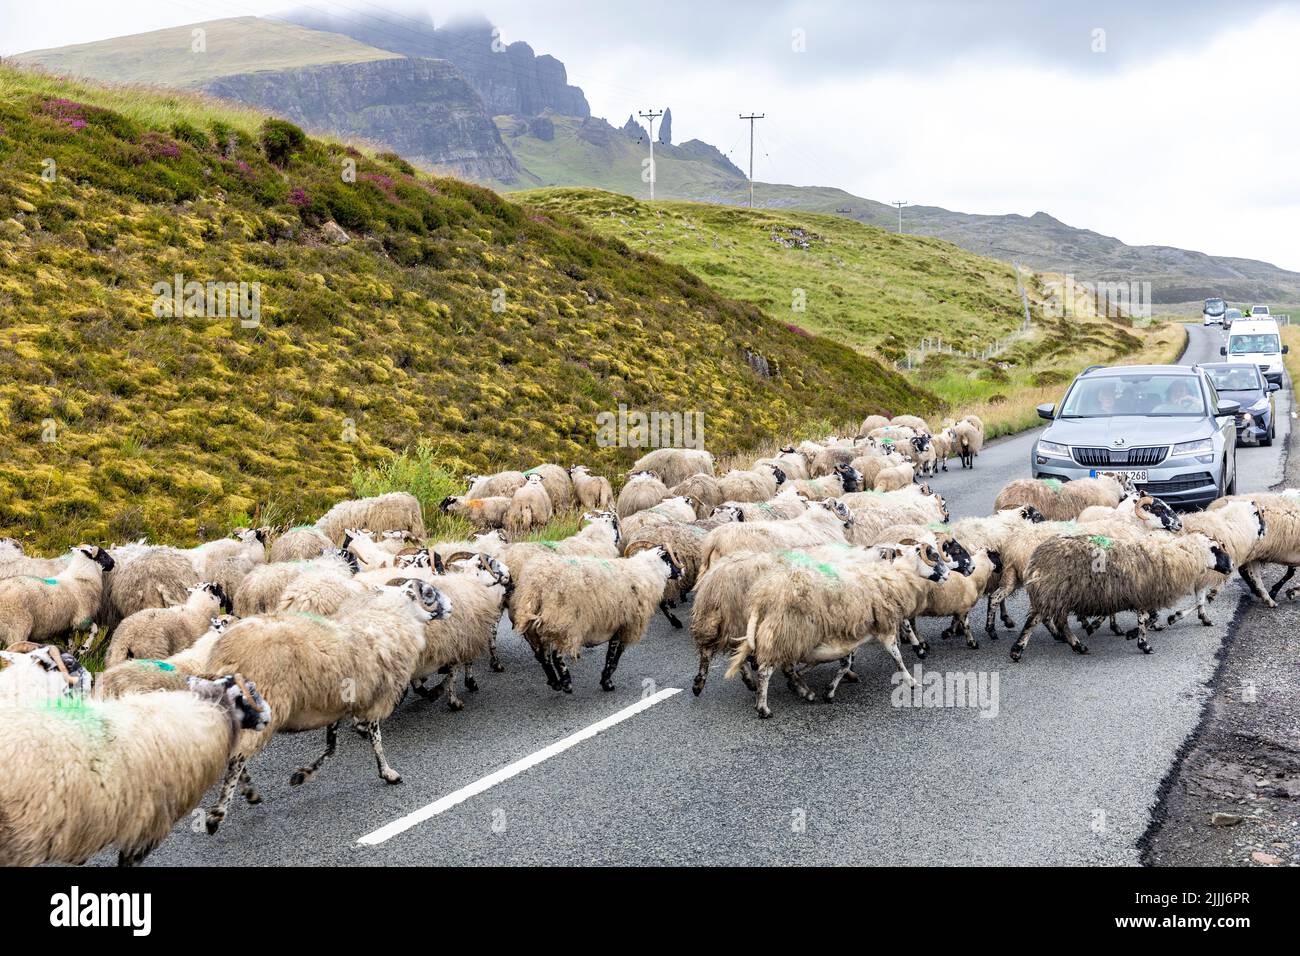 Isle of Skye farm sheep on the road hold up cars and traffic as the sheep move off the road,Scotland,UK on a summers day Stock Photo